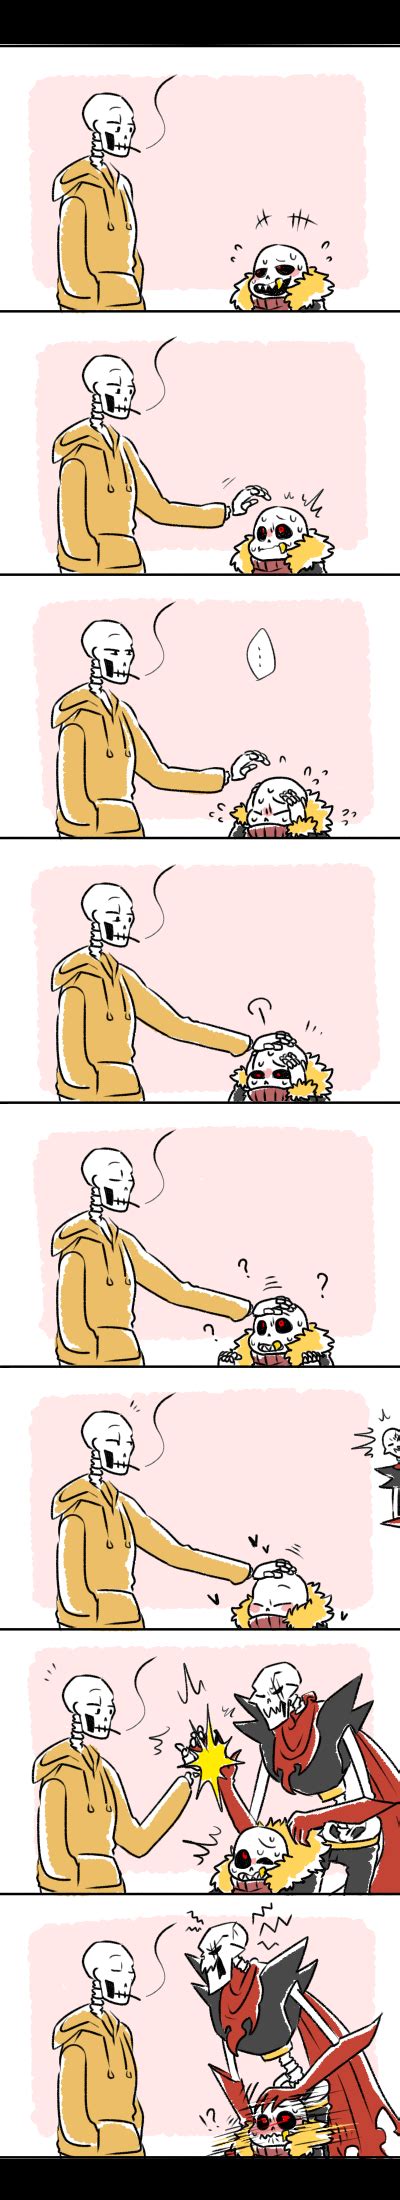 Aww Looks Like Underfell Papyrus Cares About His Brother